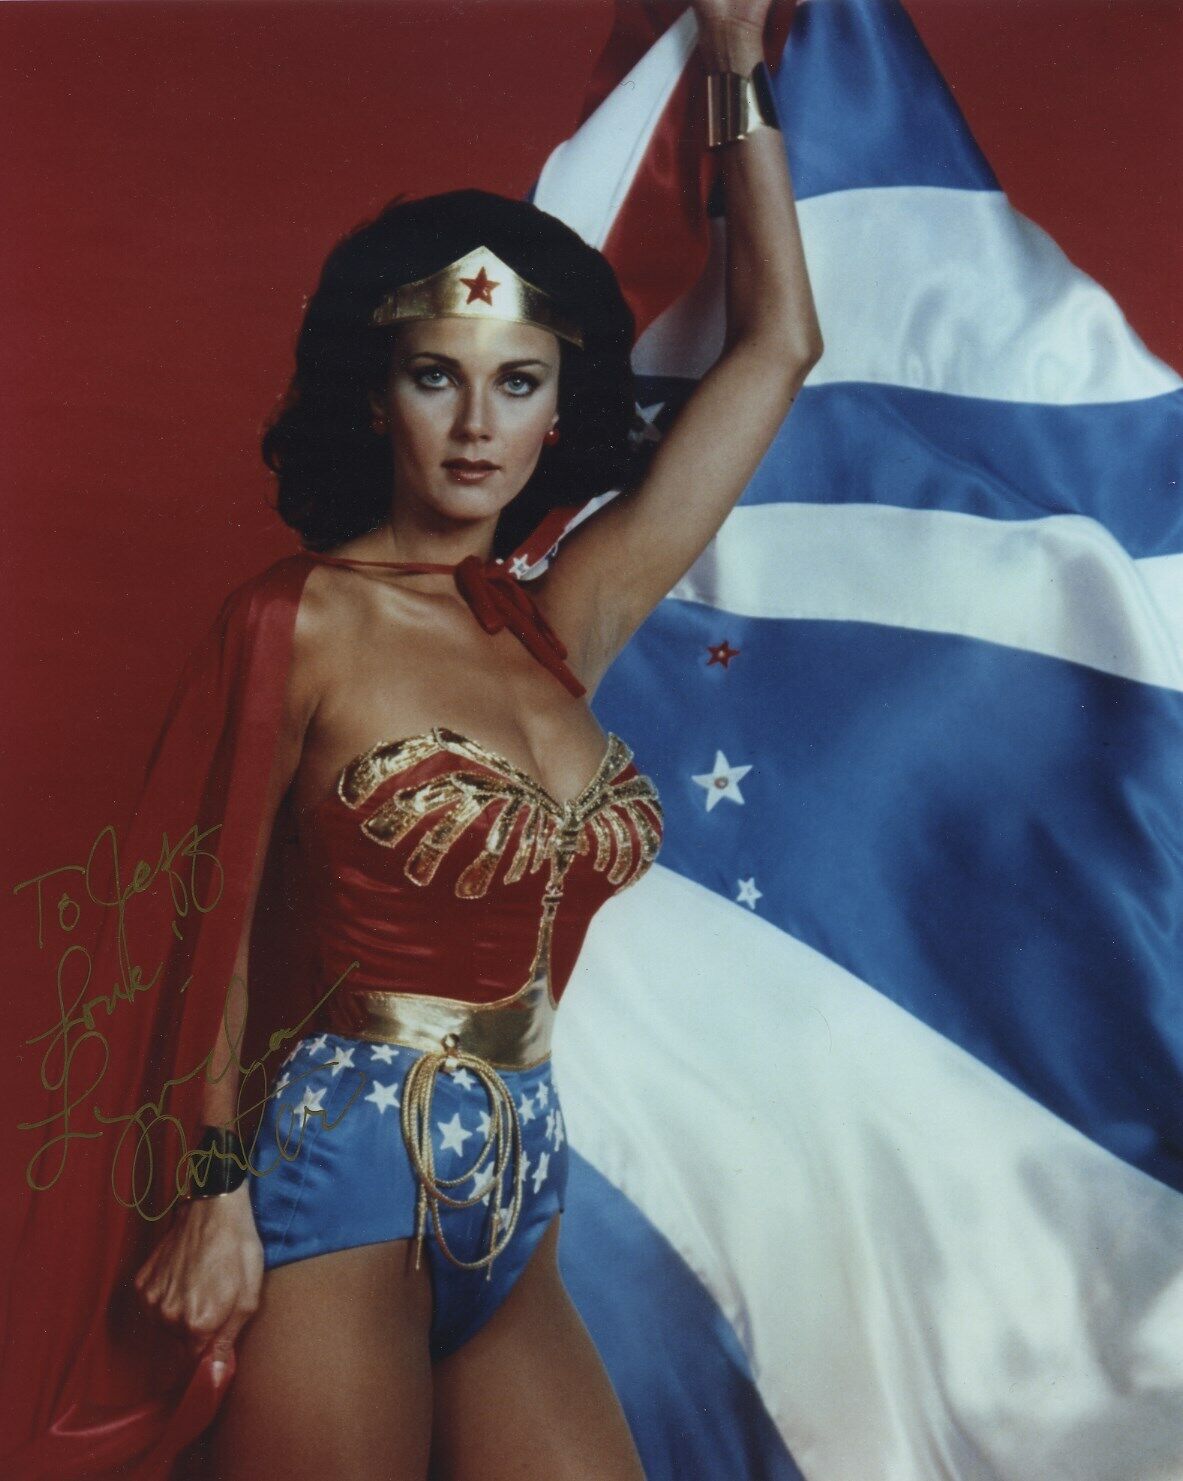 LYNDA CARTER SIGNED AUTOGRAPHED WONDERWOMAN COLOR Photo Poster painting WOW!! TO JEFF!